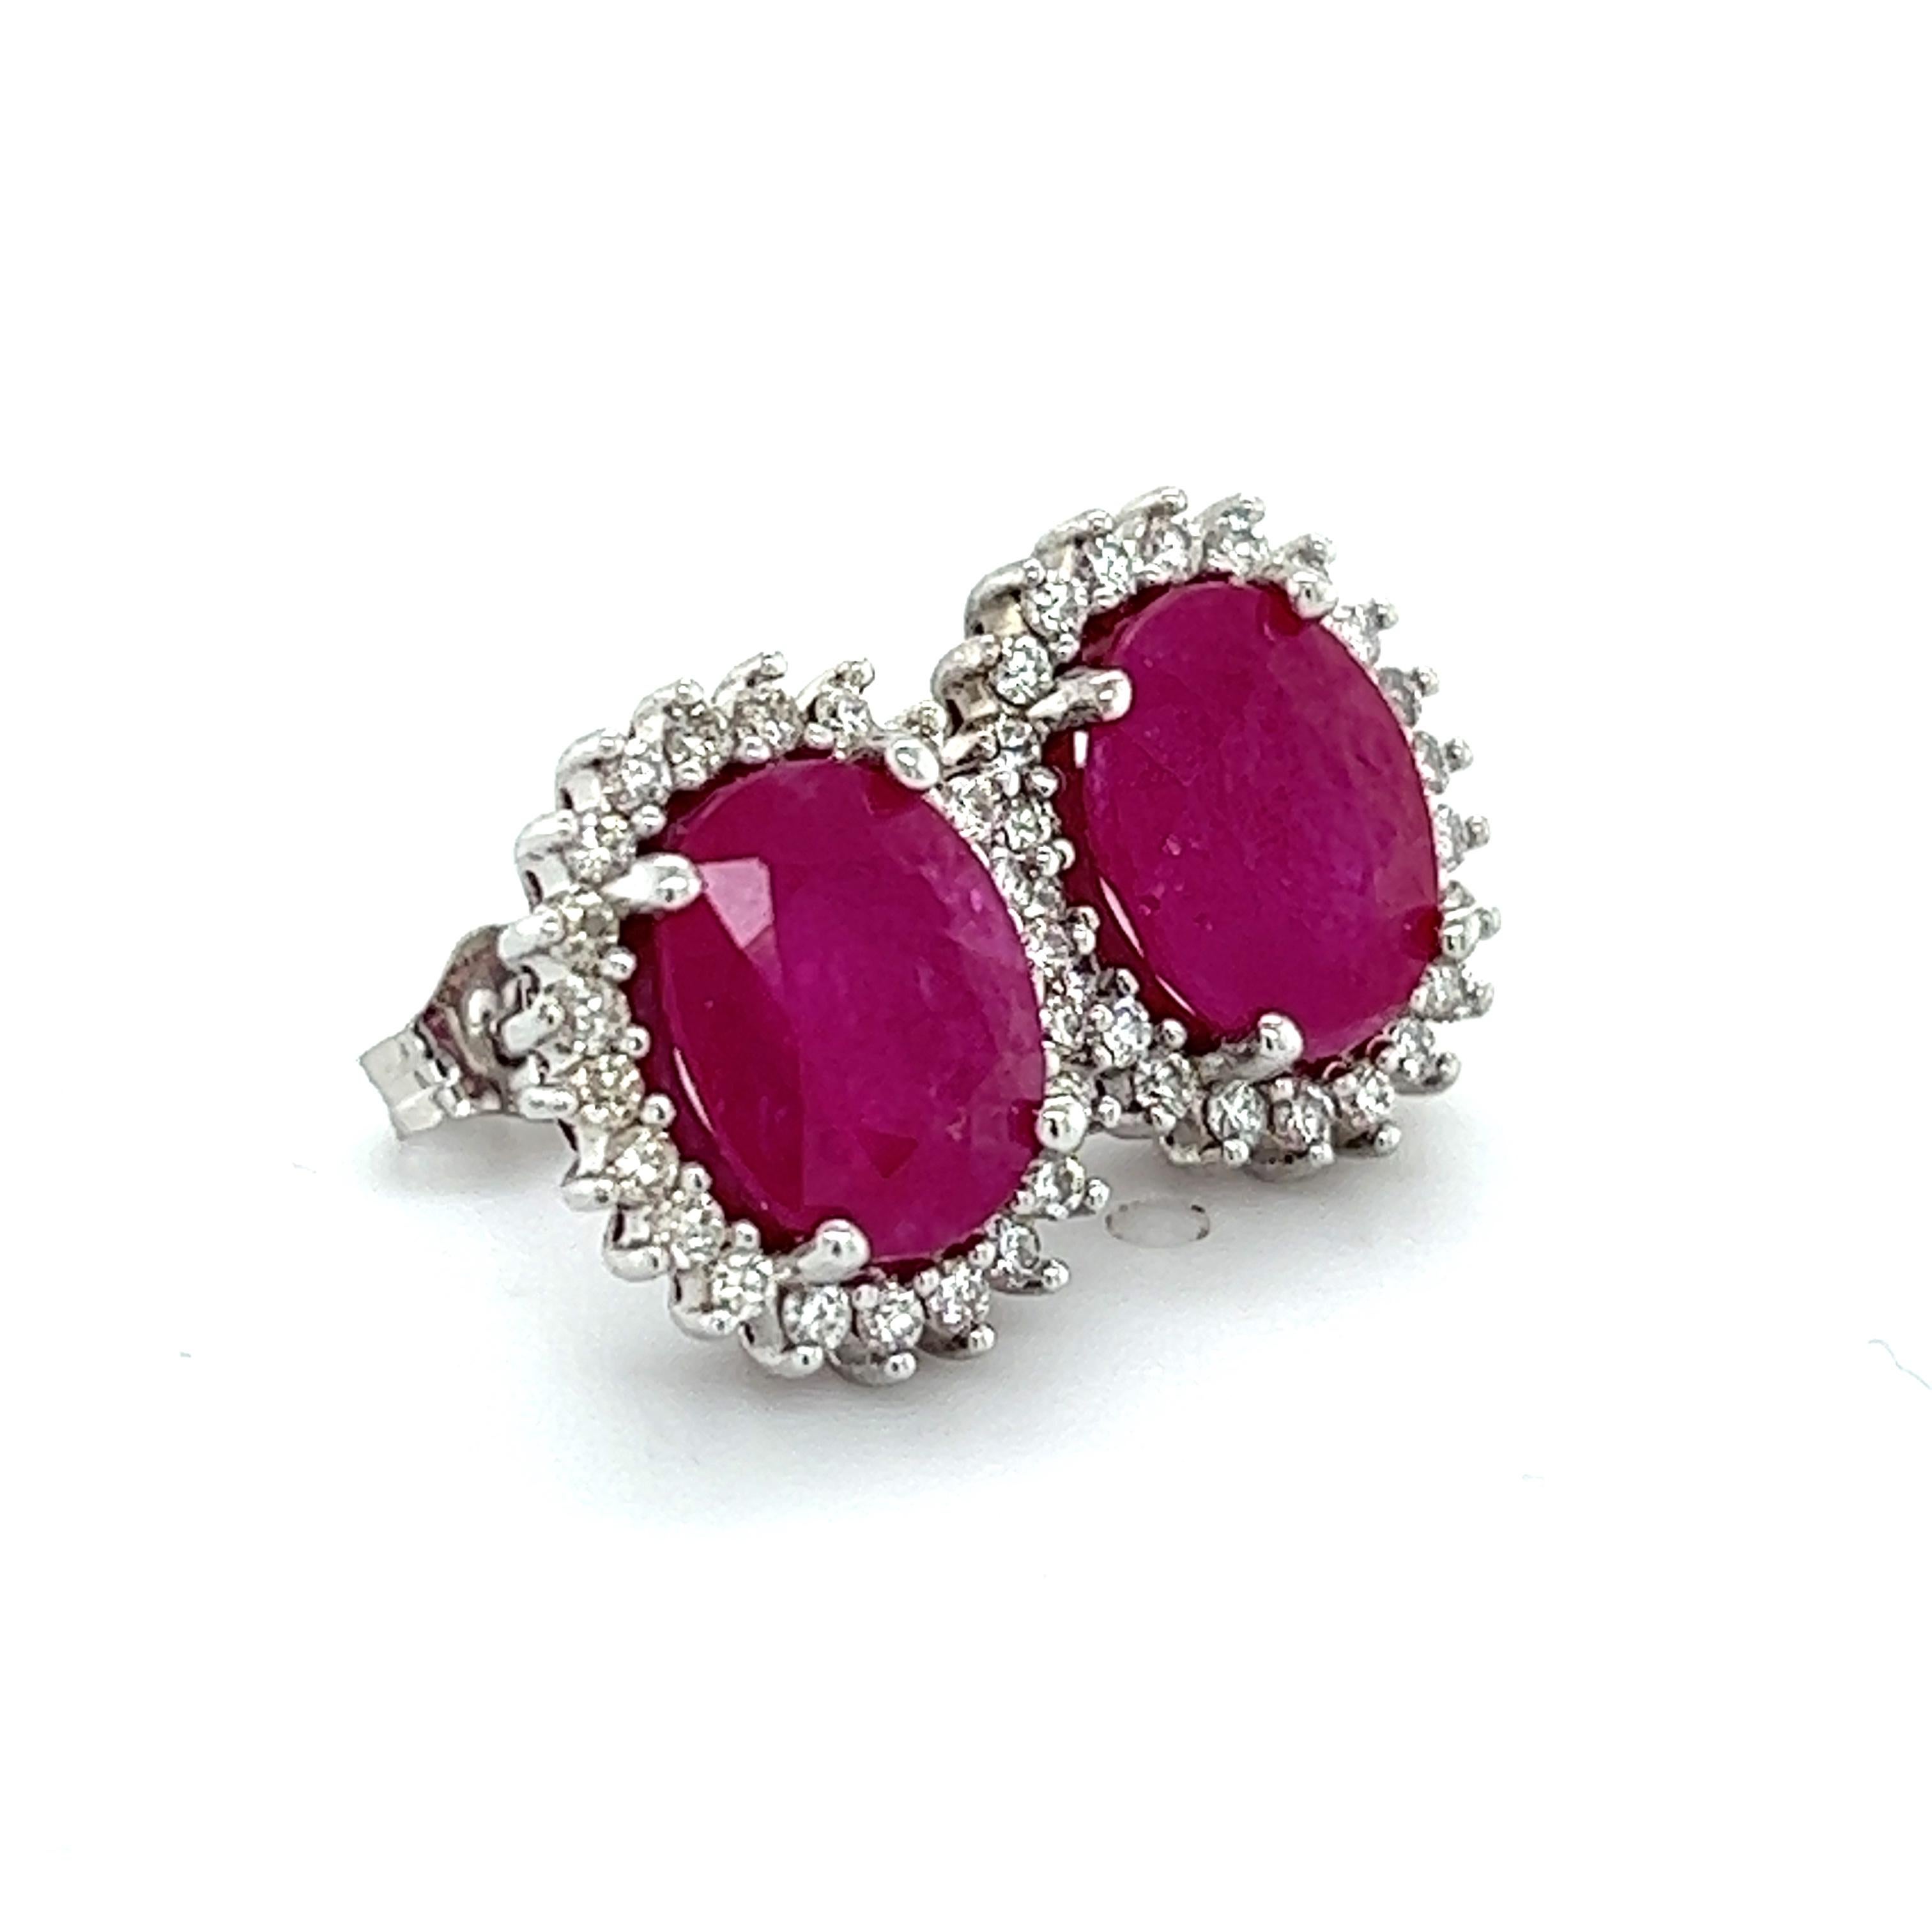 Natural Ruby Diamond Stud Earrings 14k W Gold 5.74 TCW Certified  In Good Condition For Sale In Brooklyn, NY